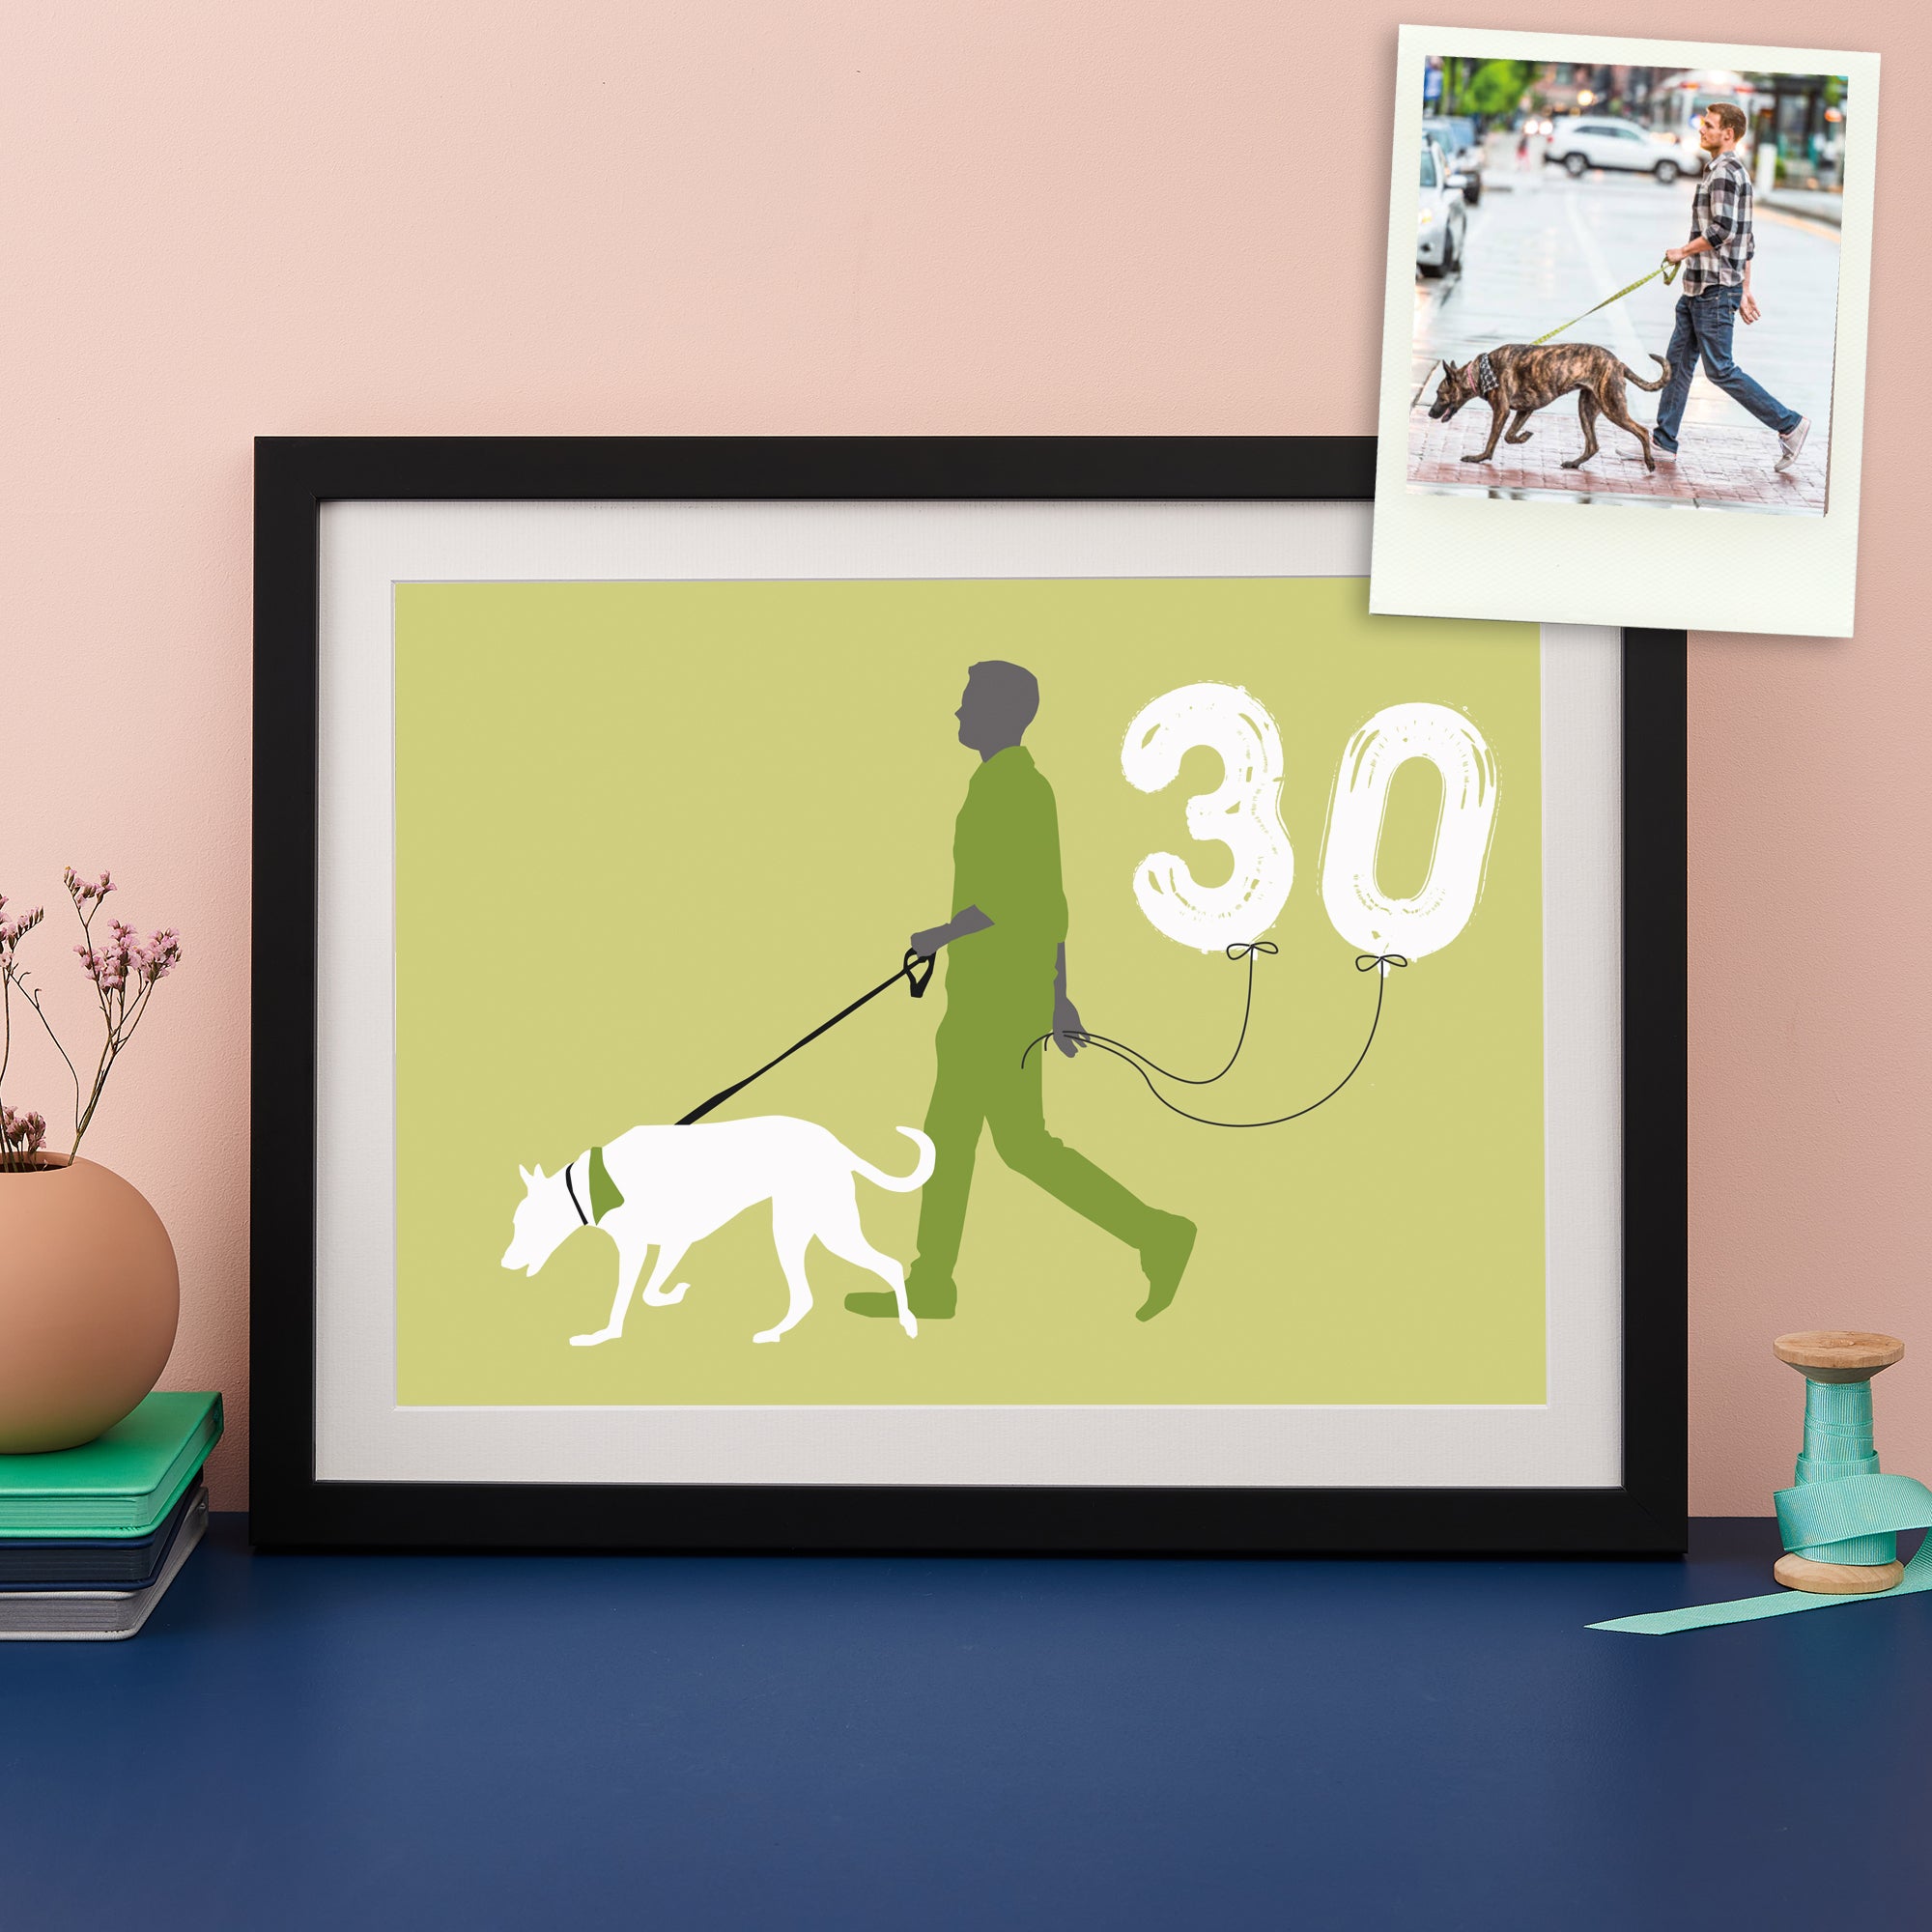 Colour pop modern silhouette image of a man walking a dog holding balloons saying  30